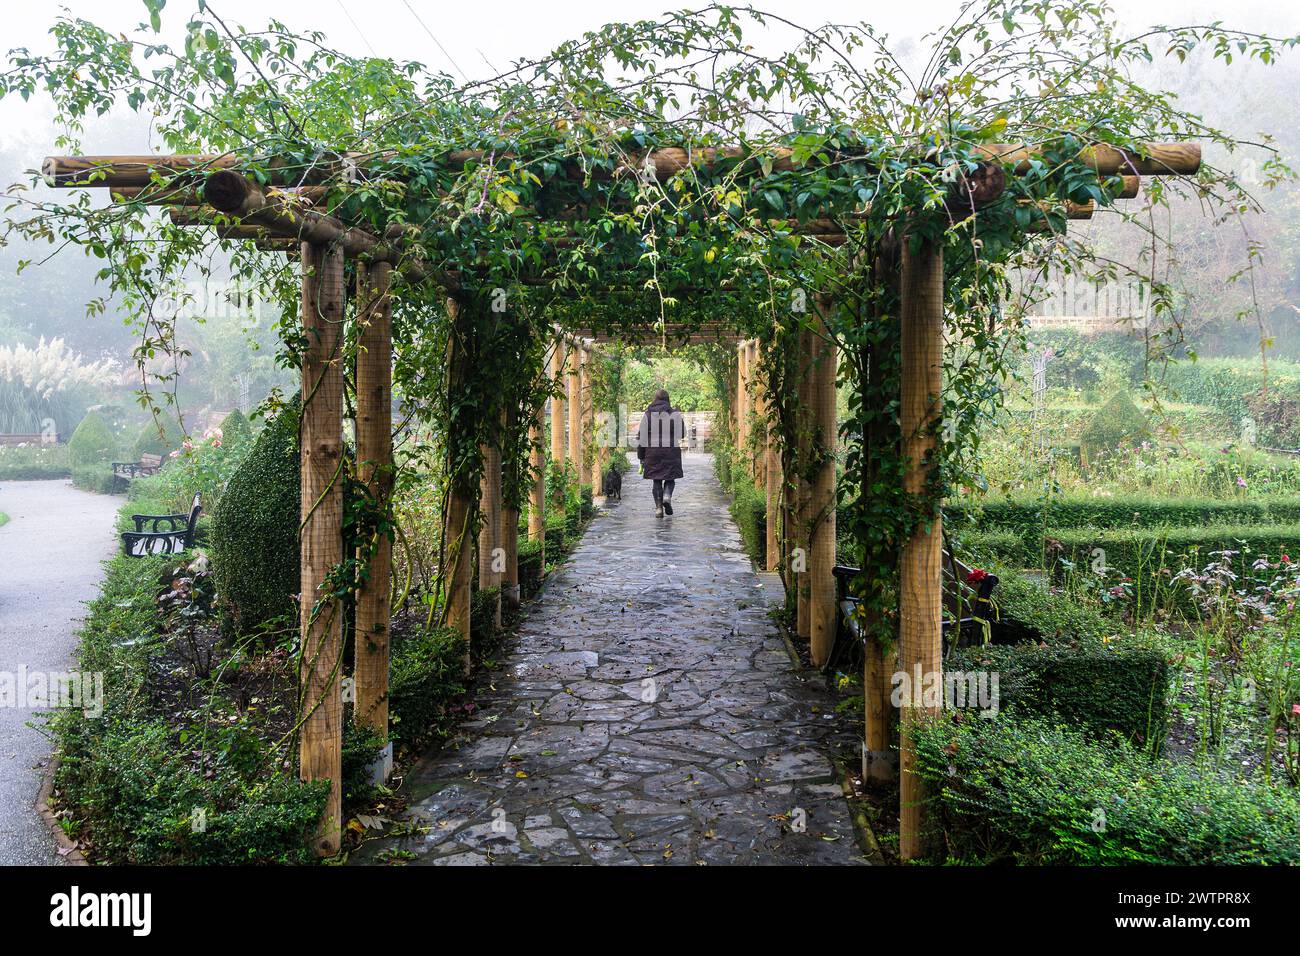 UK weather; A woman walking along a decorative wooden pergola in Trenance Rose Garden in misty weather conditions Newquay in Cornwall in the UK. Stock Photo